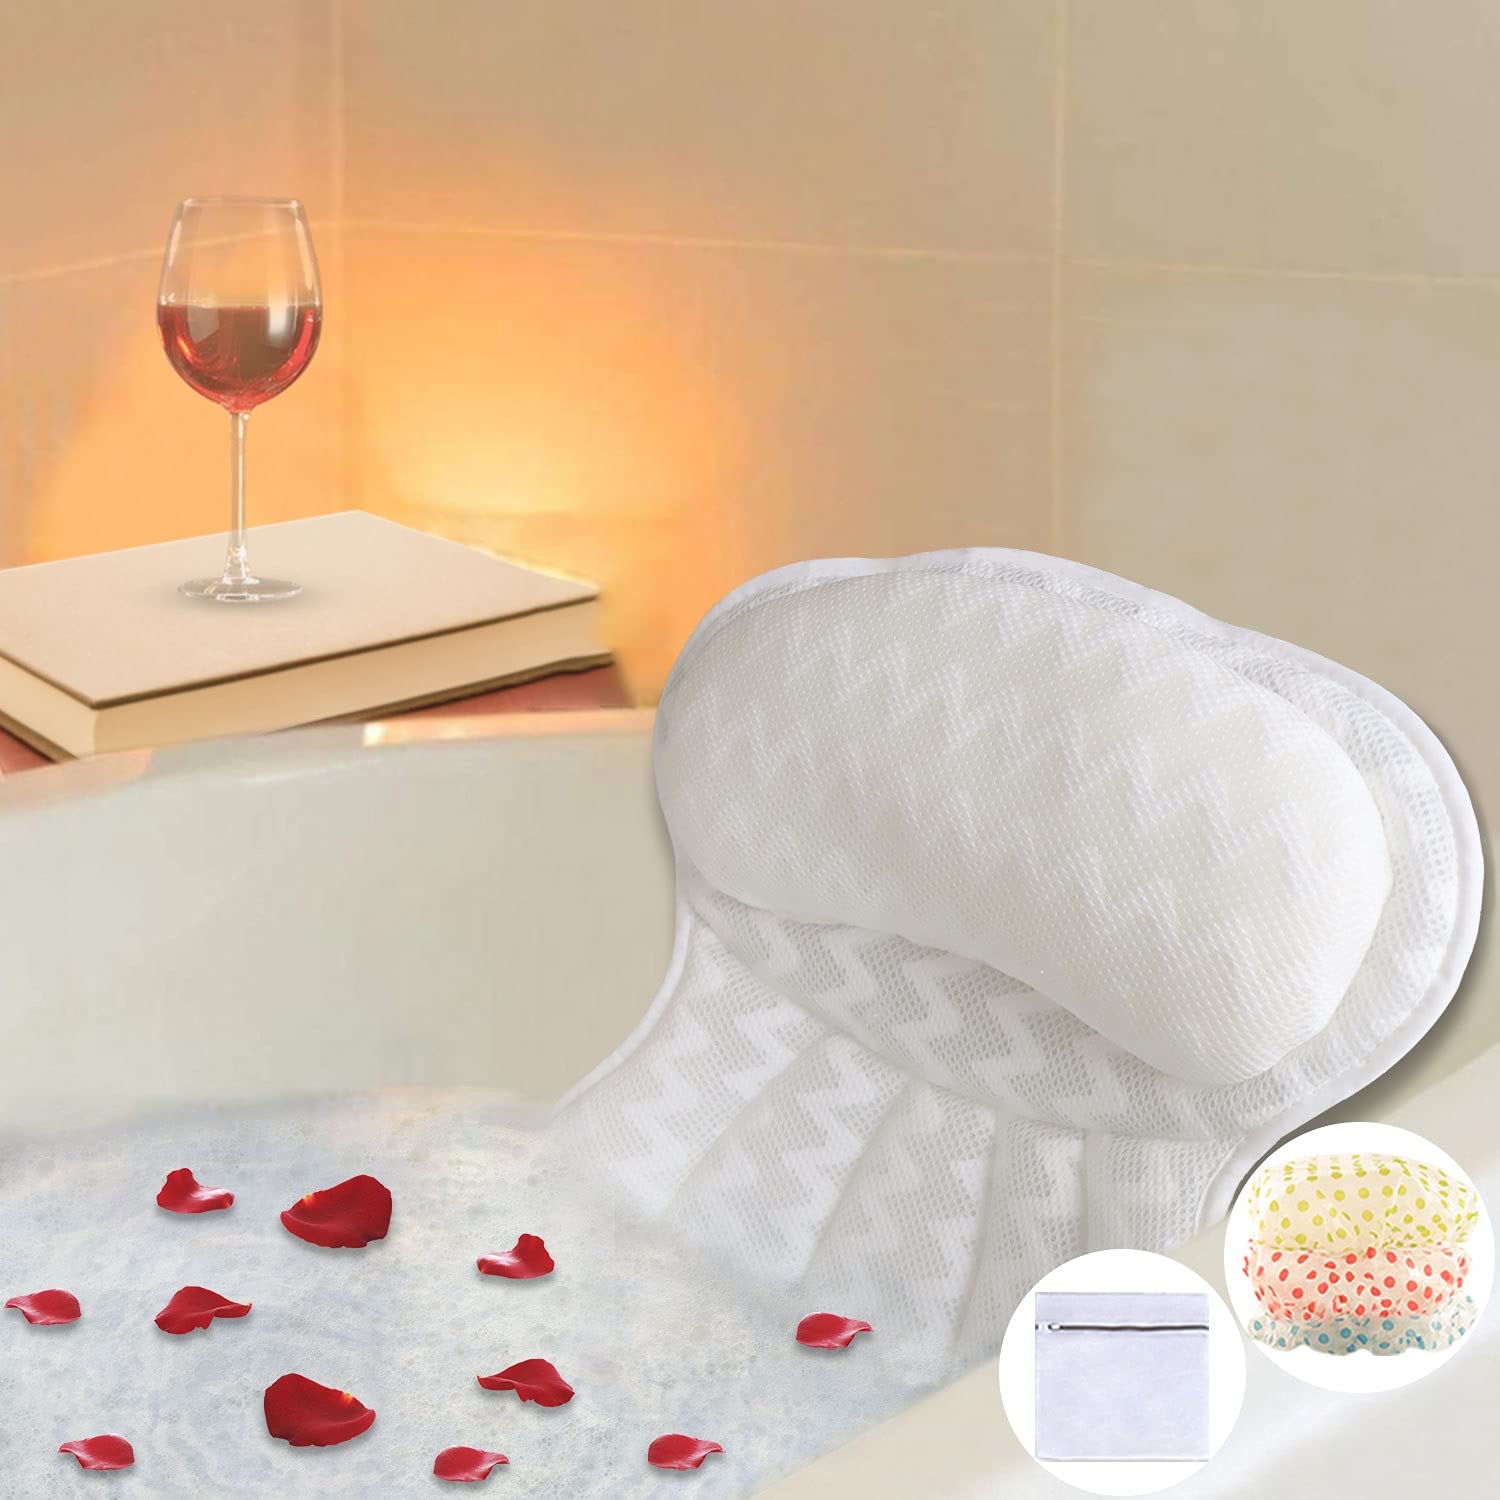 Why Use a Bathtub Cushion & What Types Are There? – Fashion Gone Rogue